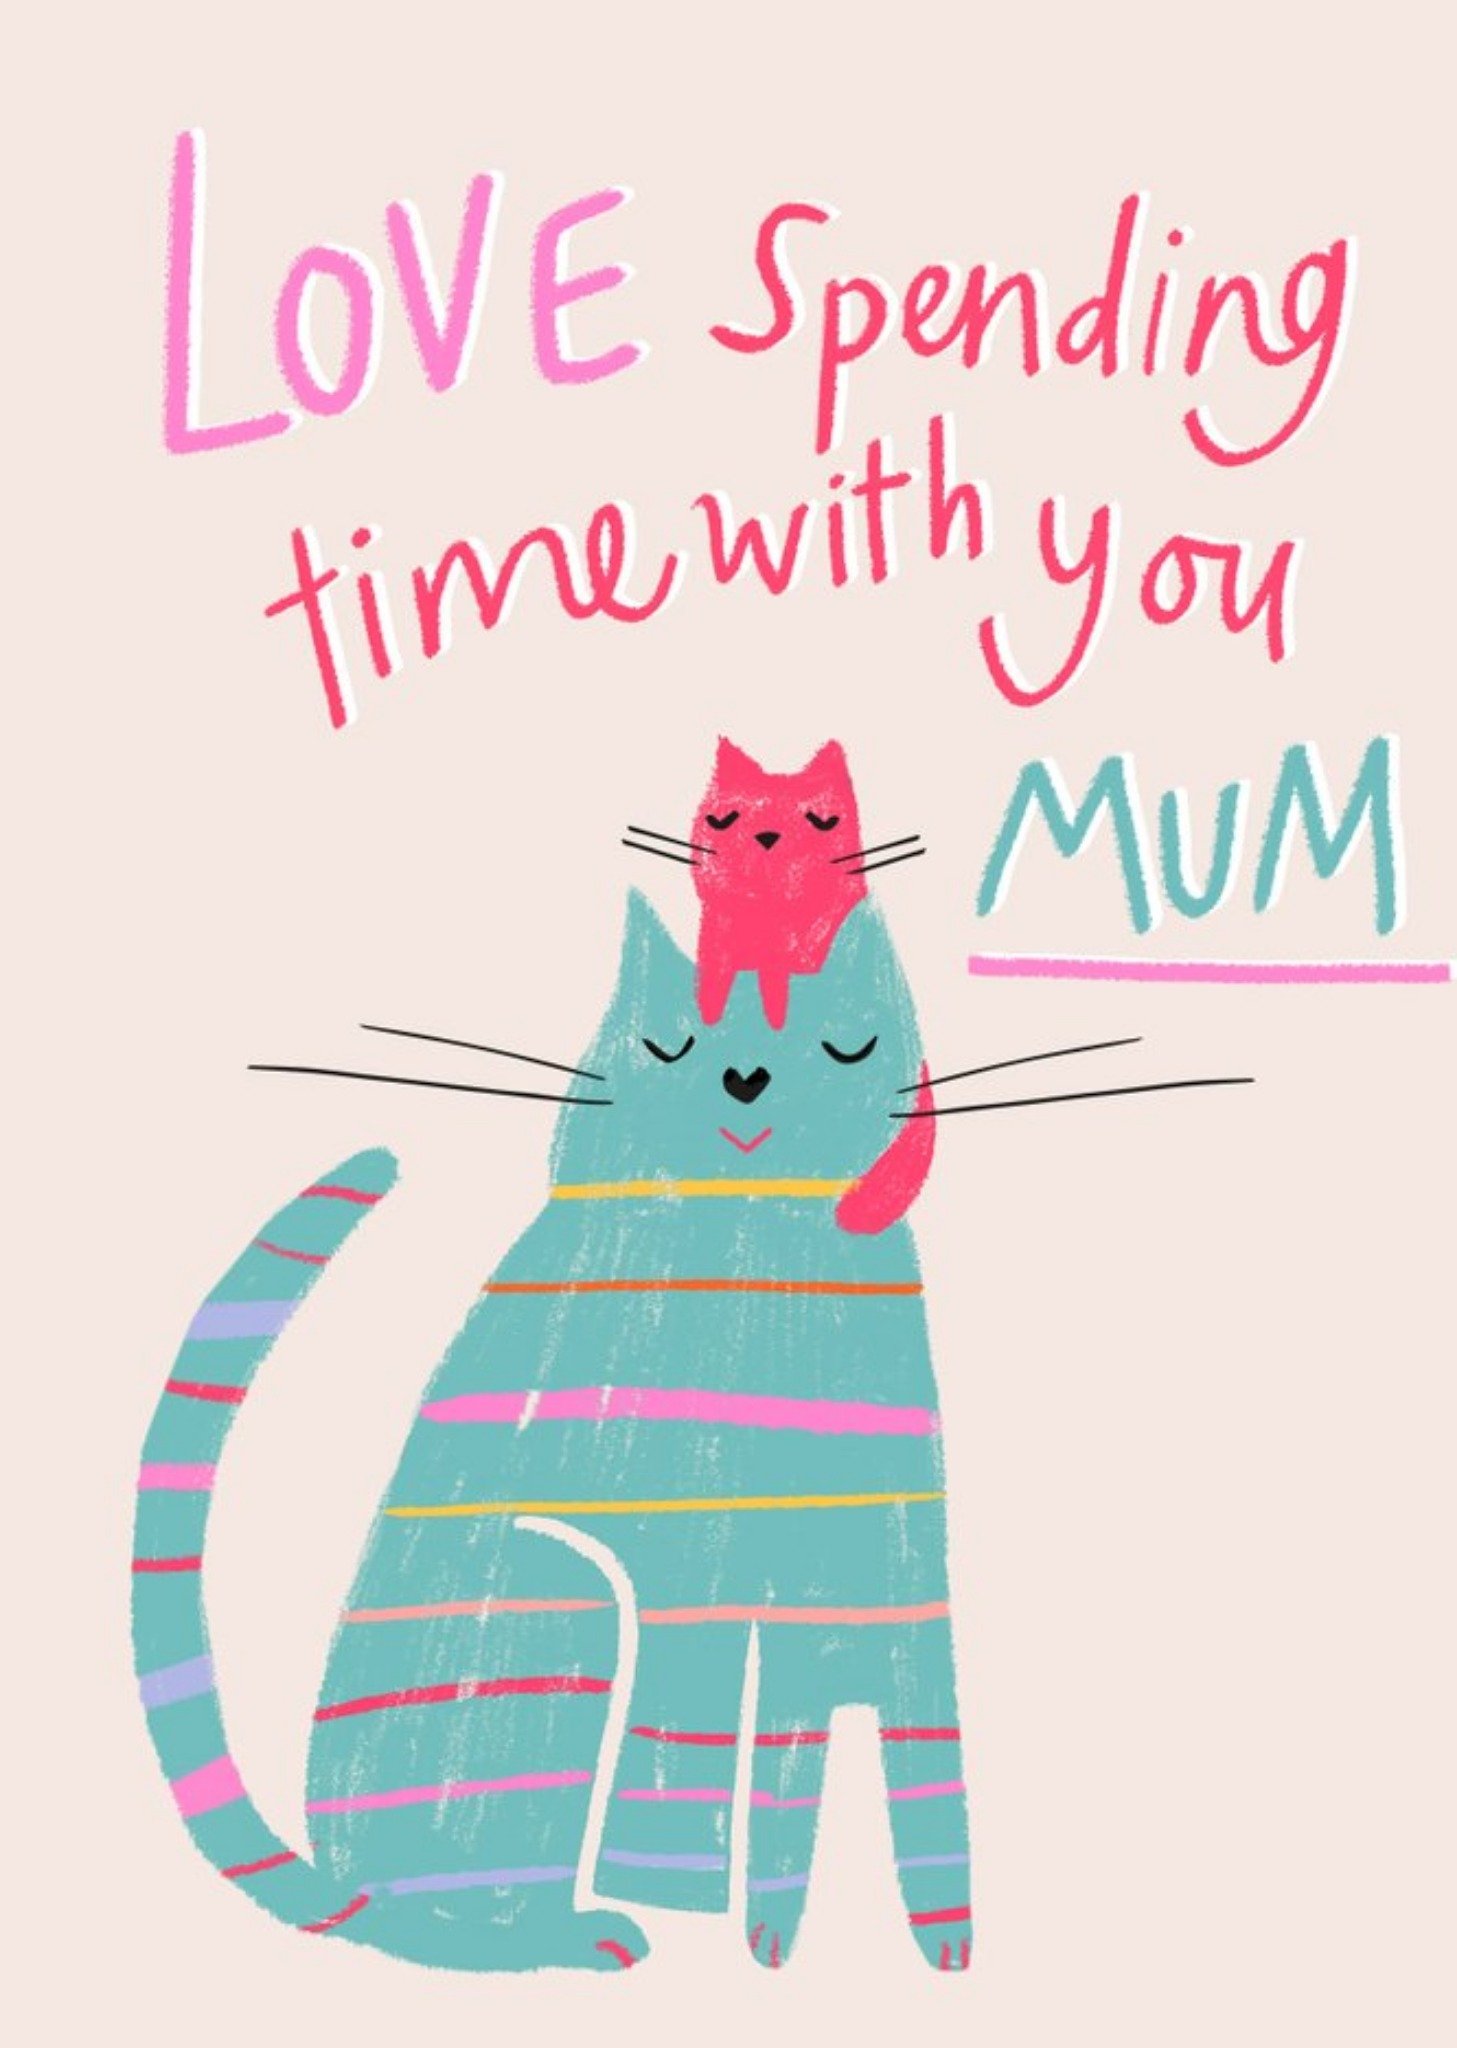 Moonpig Cute Illustration Of A Cat And A Kitten Love Spending Time With You Mother's Day Card Ecard